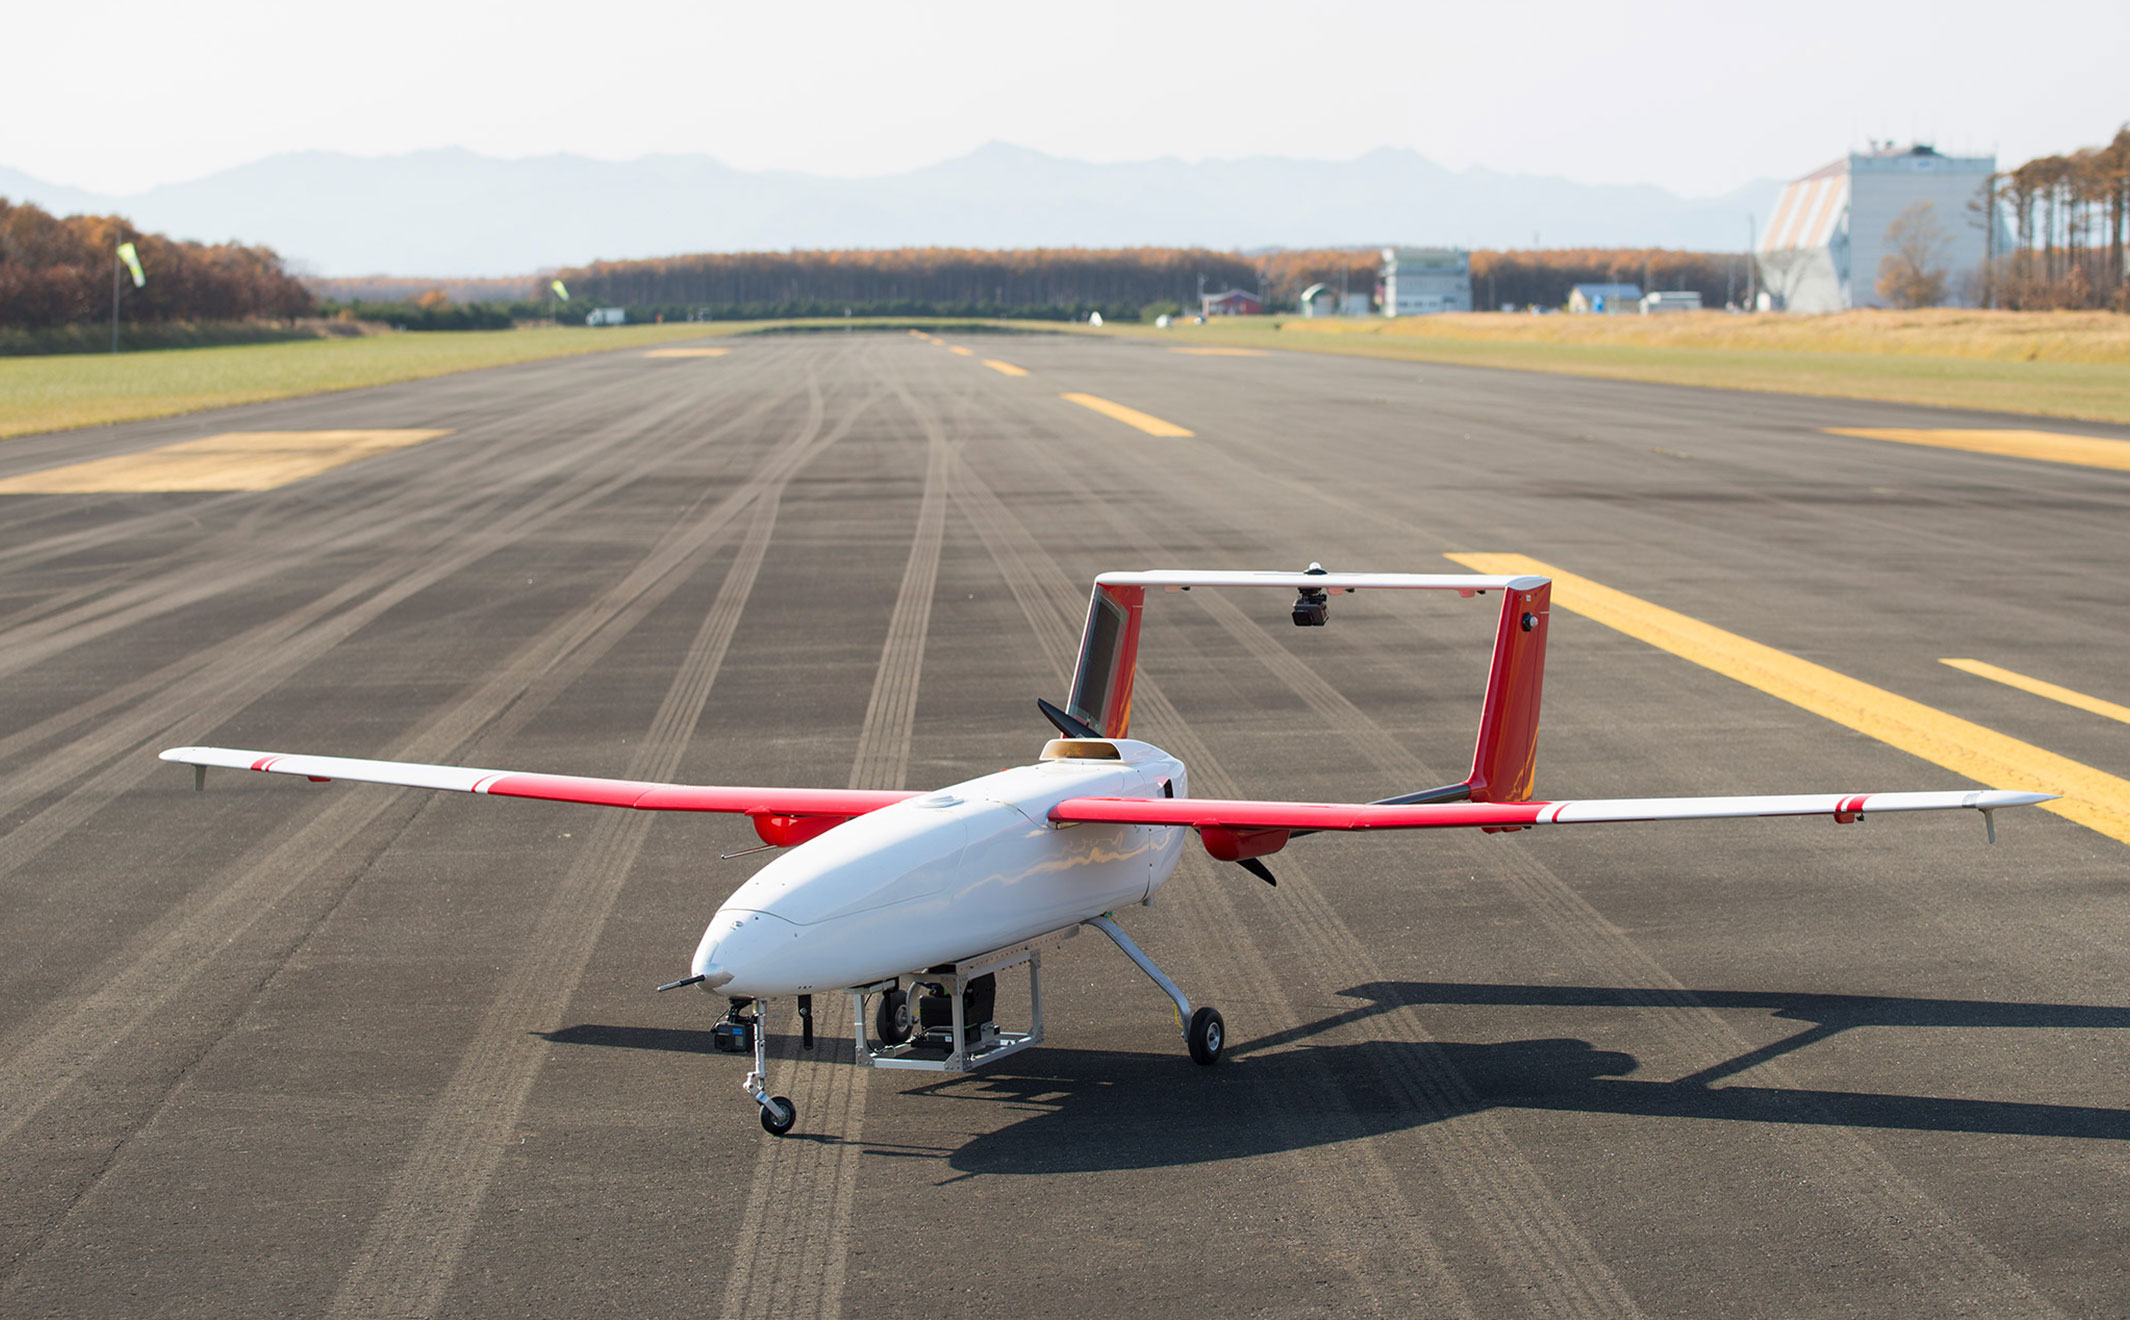 Technologies for Enhancing the Flight Safety and Expanding the Mission Capabilities of Small UAS